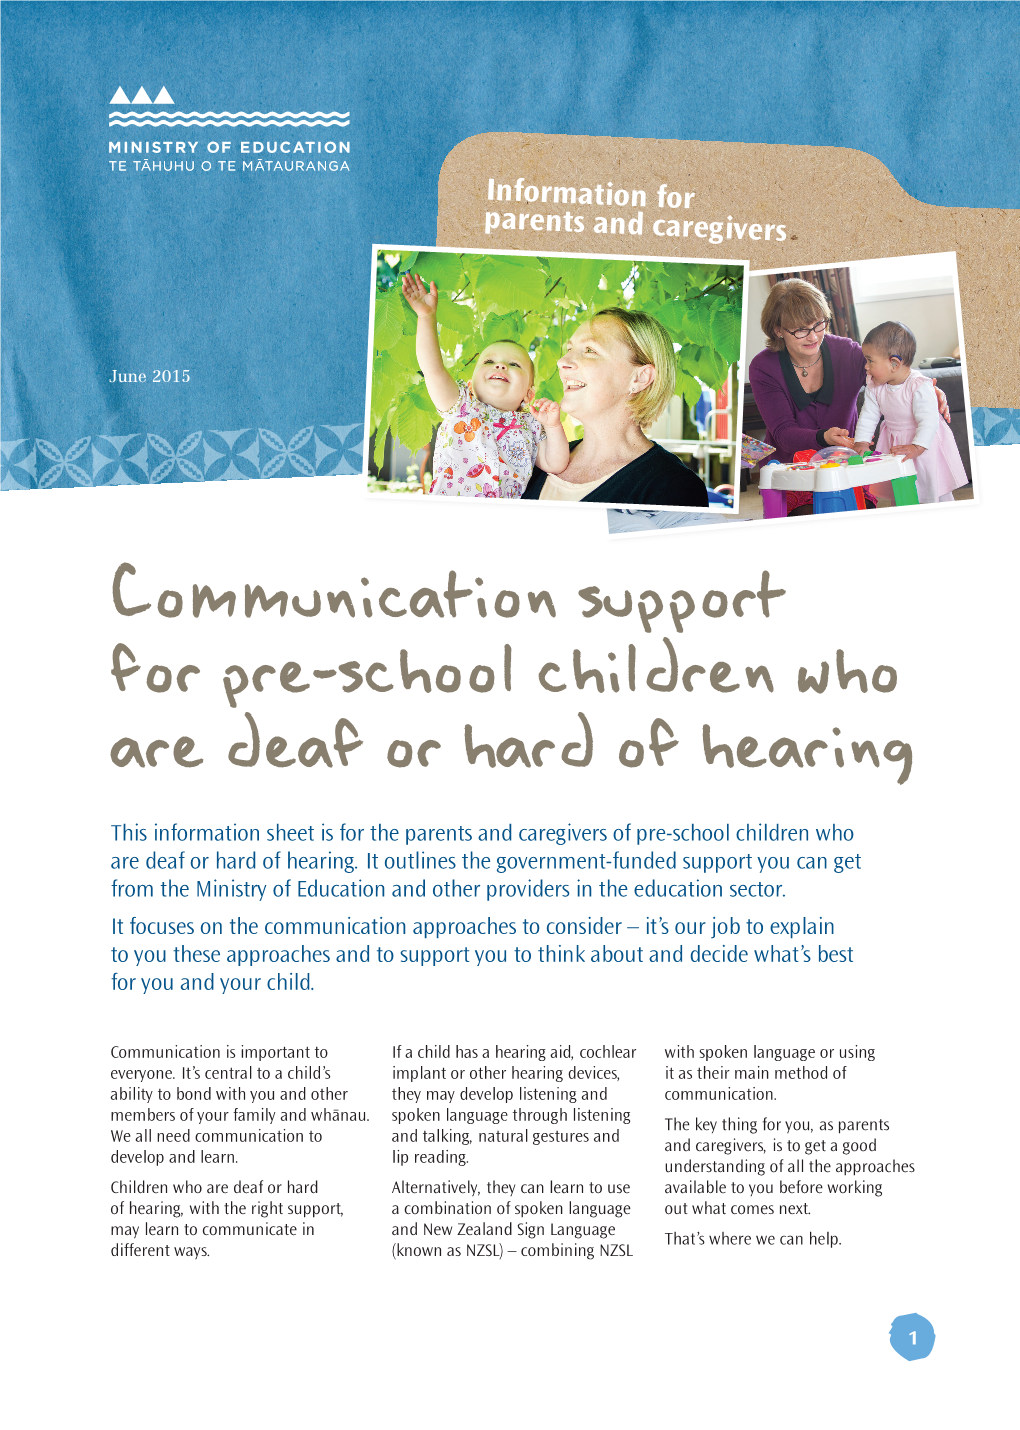 Communication Support for Pre-School Children Who Are Deaf Or Hard of Hearing